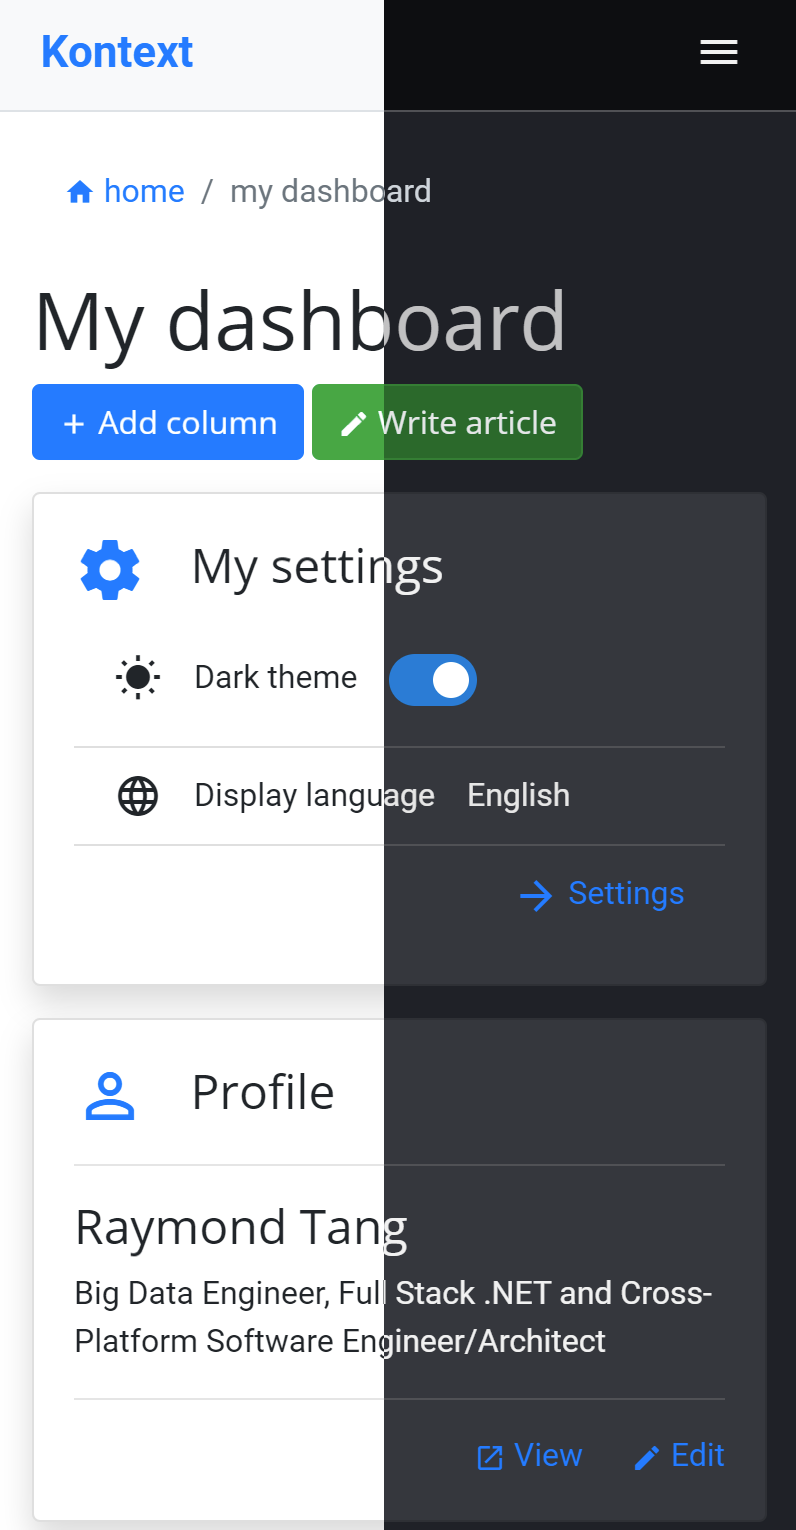 Kontext Dark Theme Mode is Available